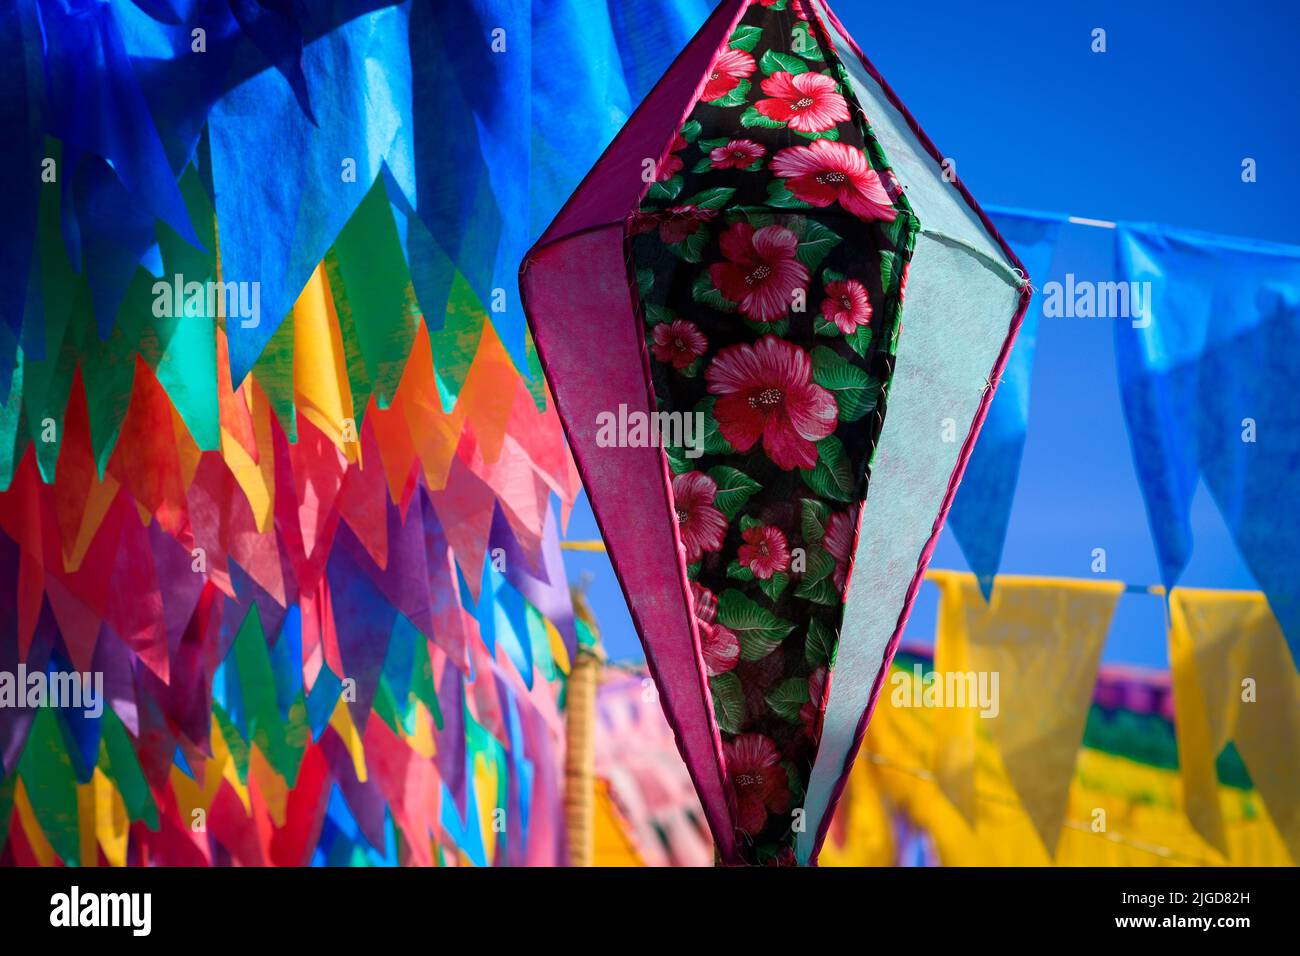 festa junina decoration  - decorative balloons and colorful flags of são joão party in brazil Stock Photo